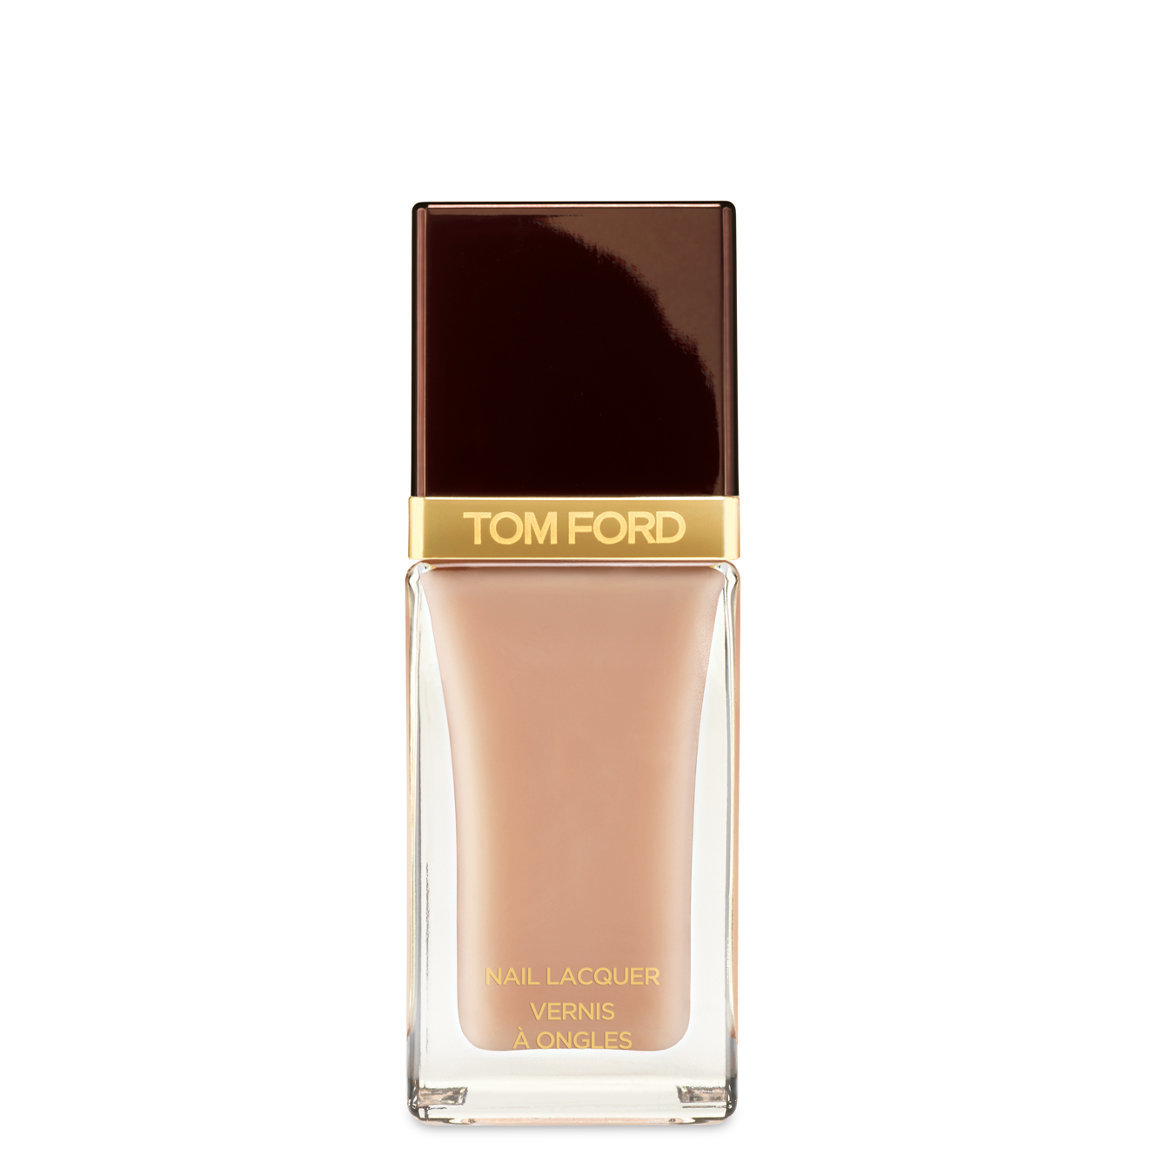 TOM FORD Nail Lacquer Toasted Sugar alternative view 1.